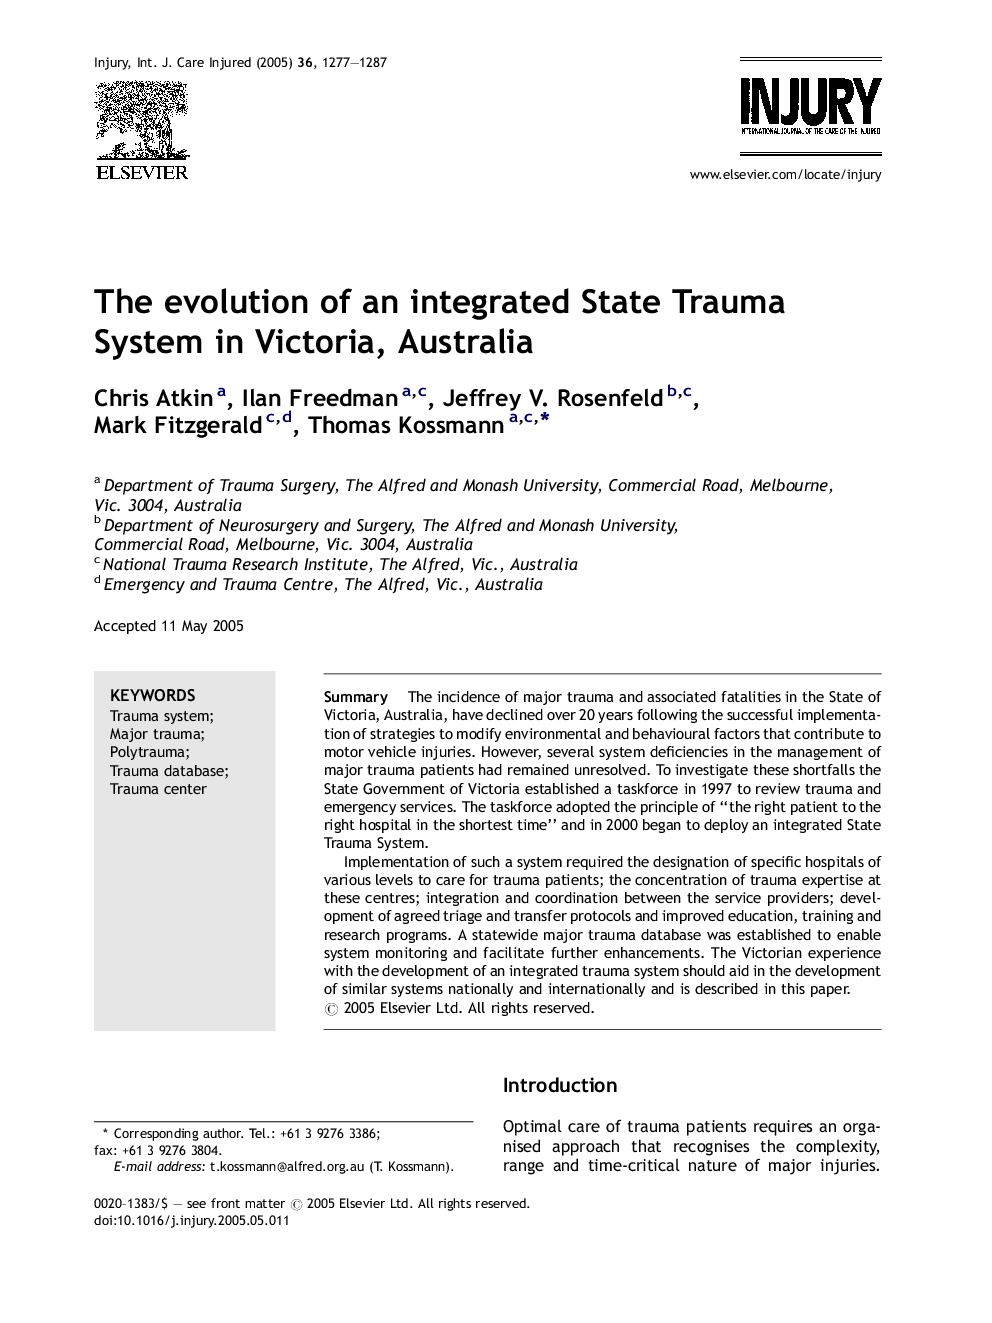 The evolution of an integrated State Trauma System in Victoria, Australia